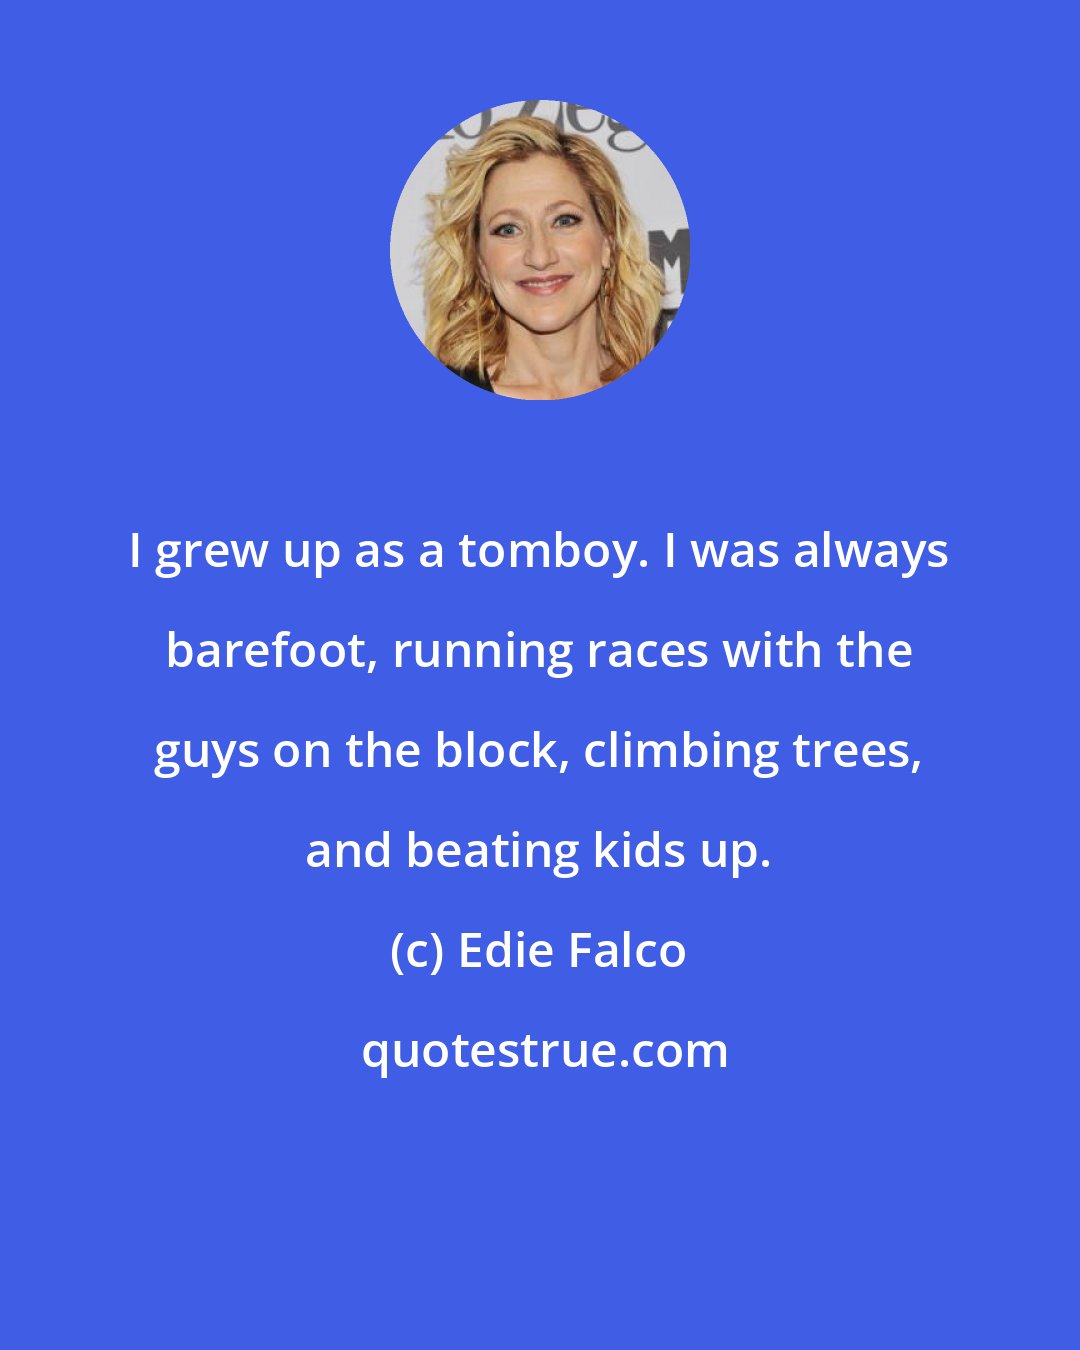 Edie Falco: I grew up as a tomboy. I was always barefoot, running races with the guys on the block, climbing trees, and beating kids up.